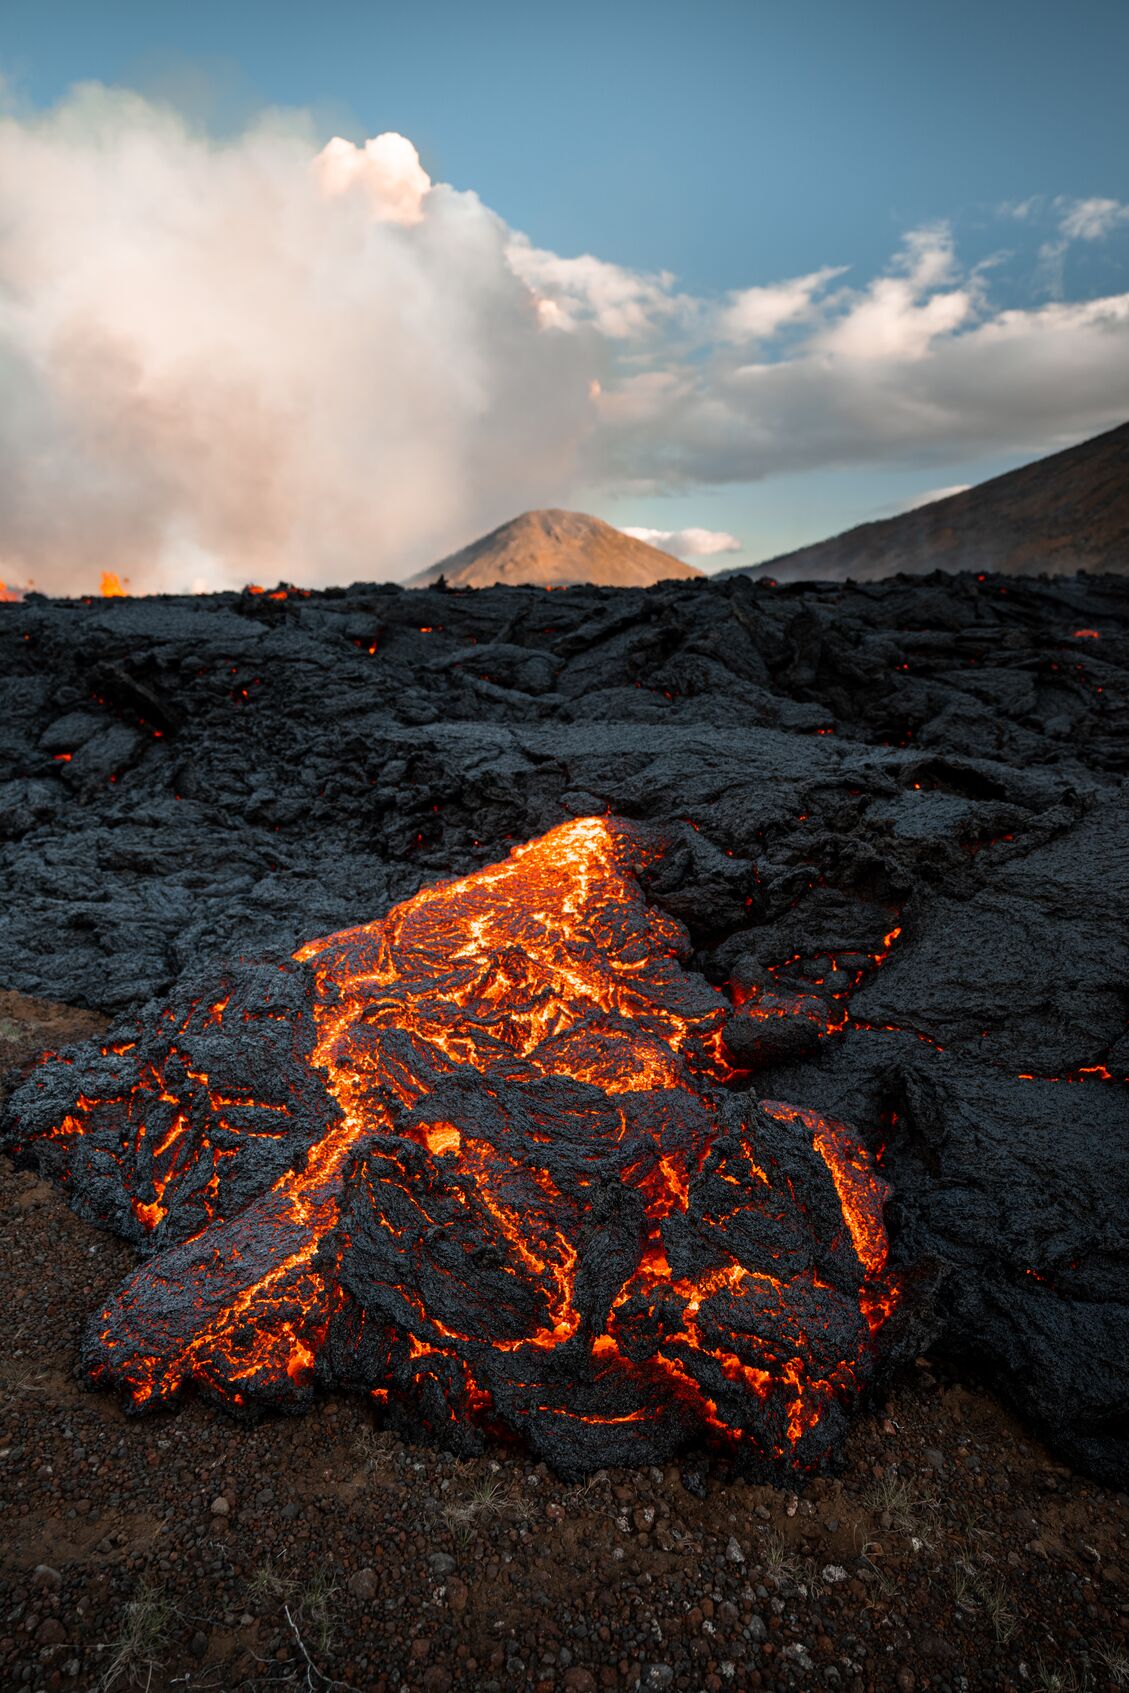 close-up image of red-hot lava field with erupting volcano in background